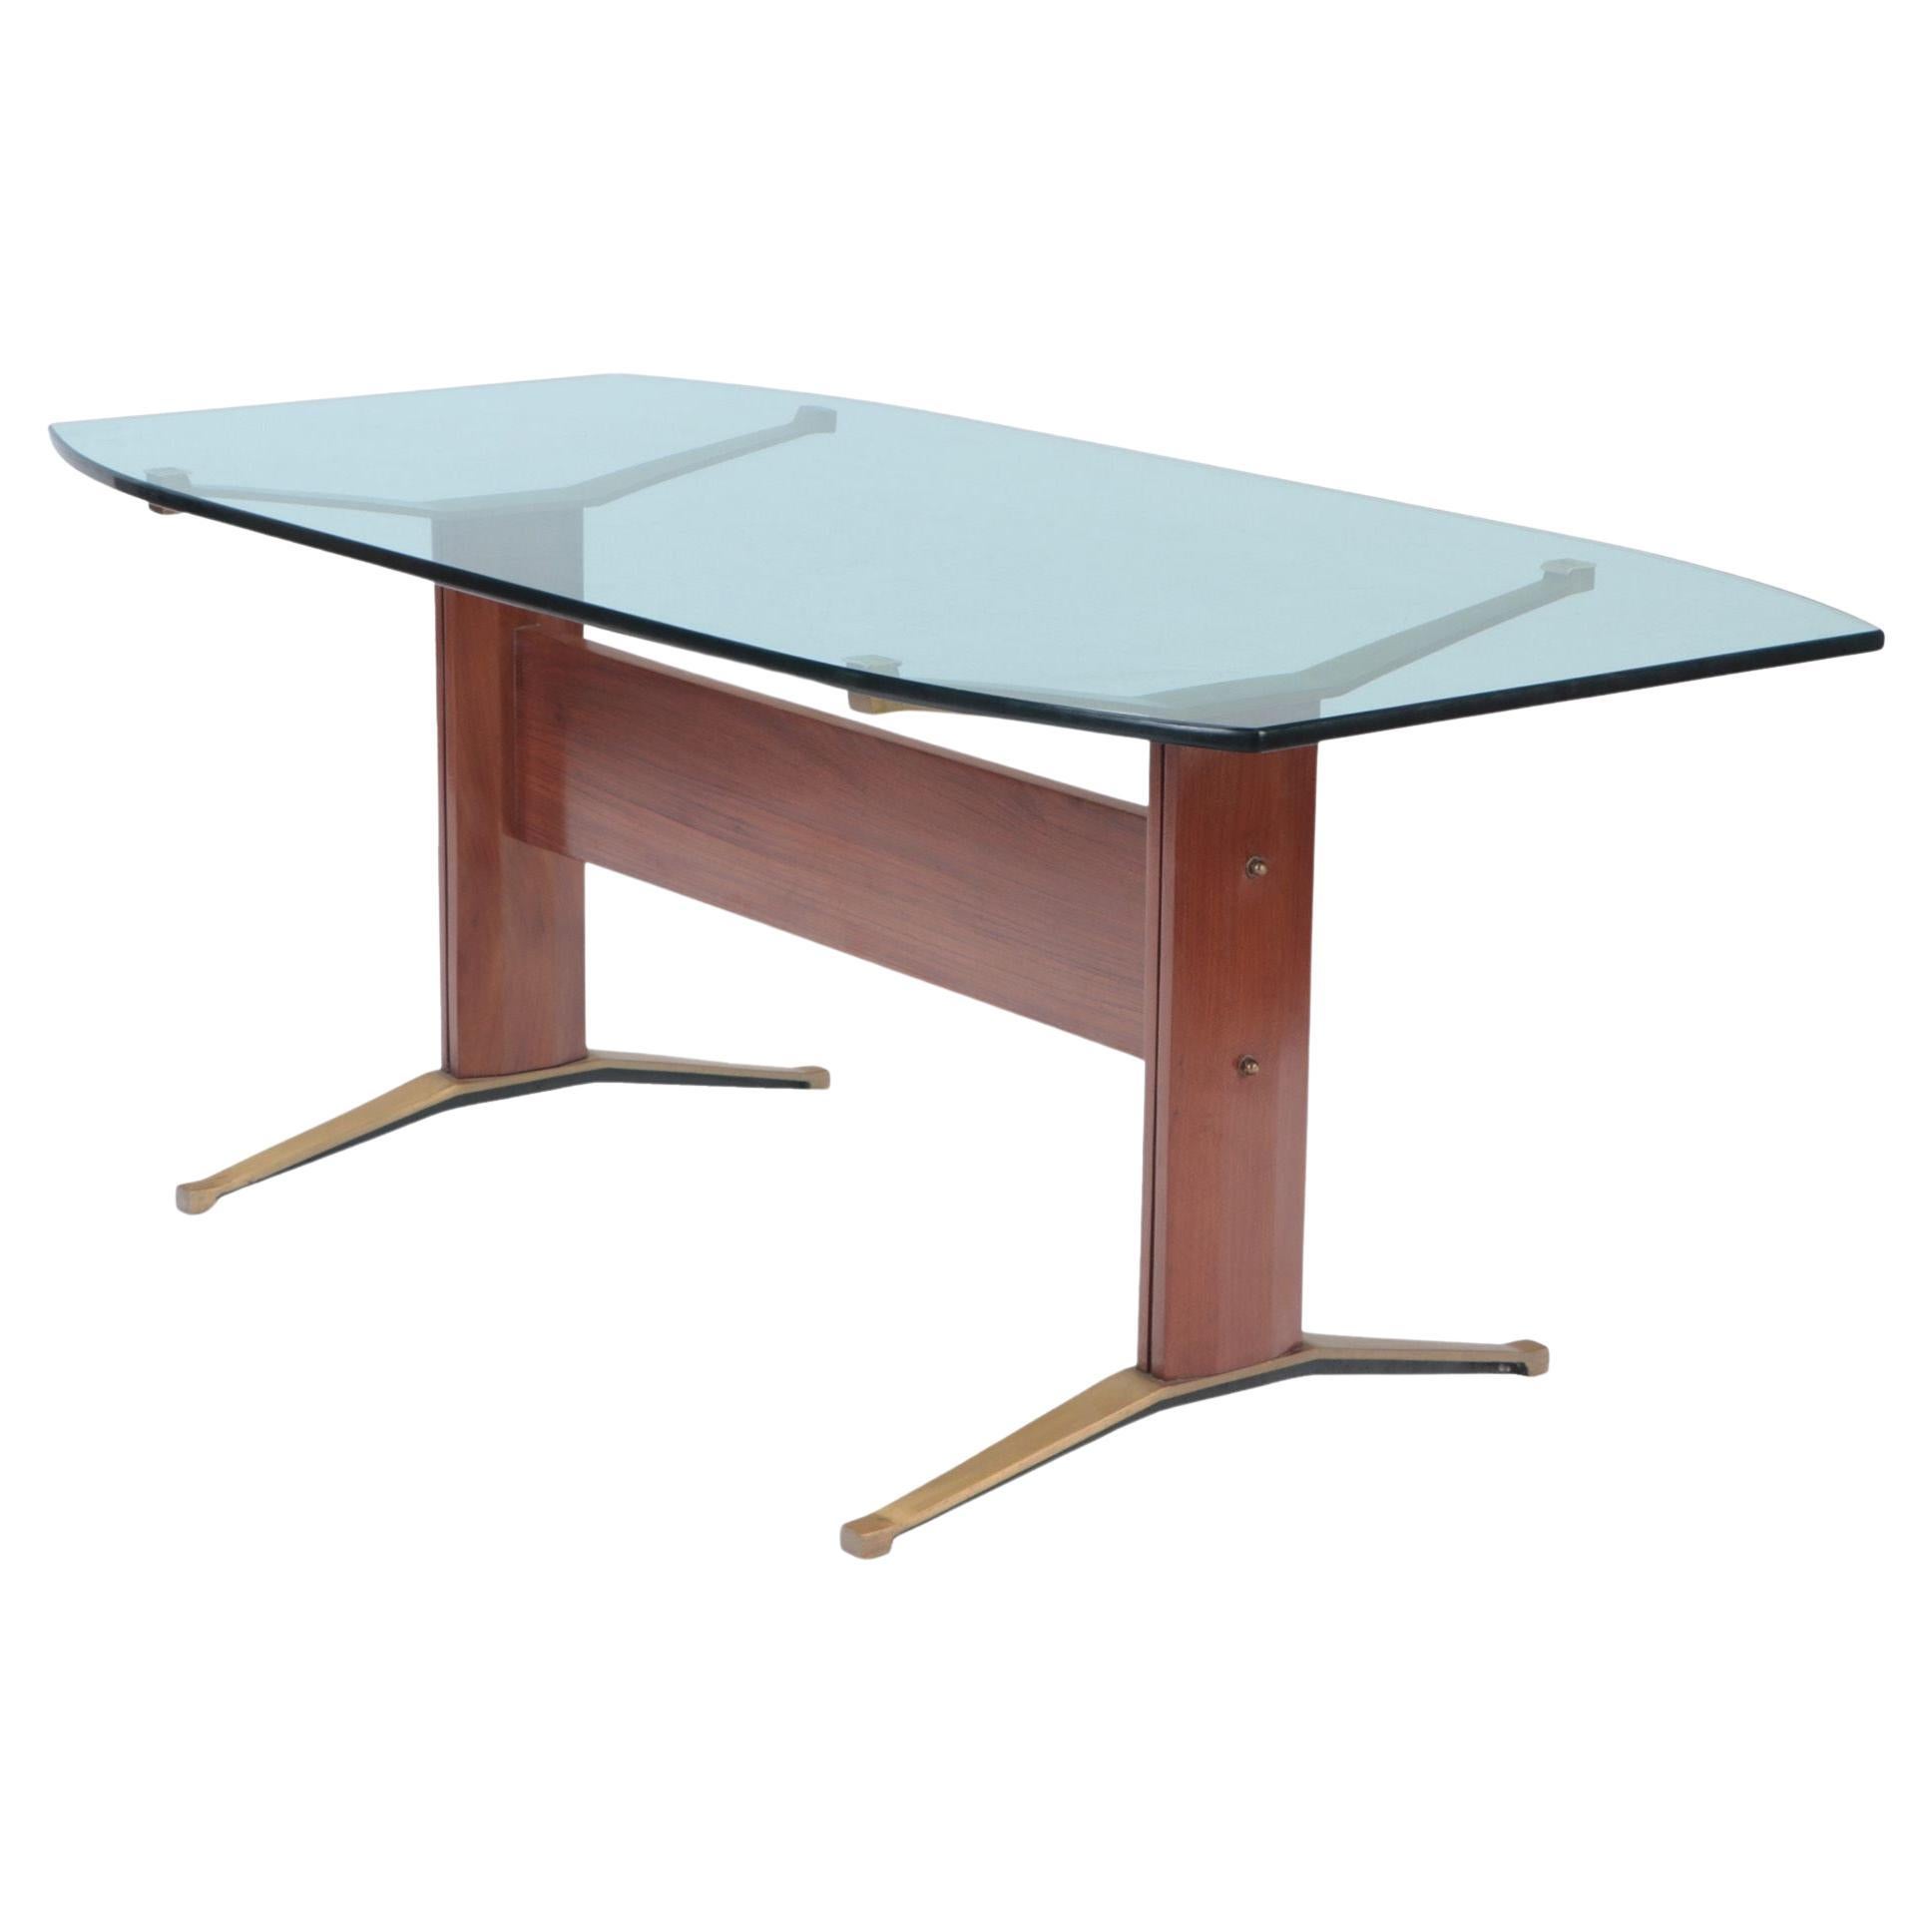 Italian Brass and Wood Writing Desk or Dining Table with Glass Top, C 1955